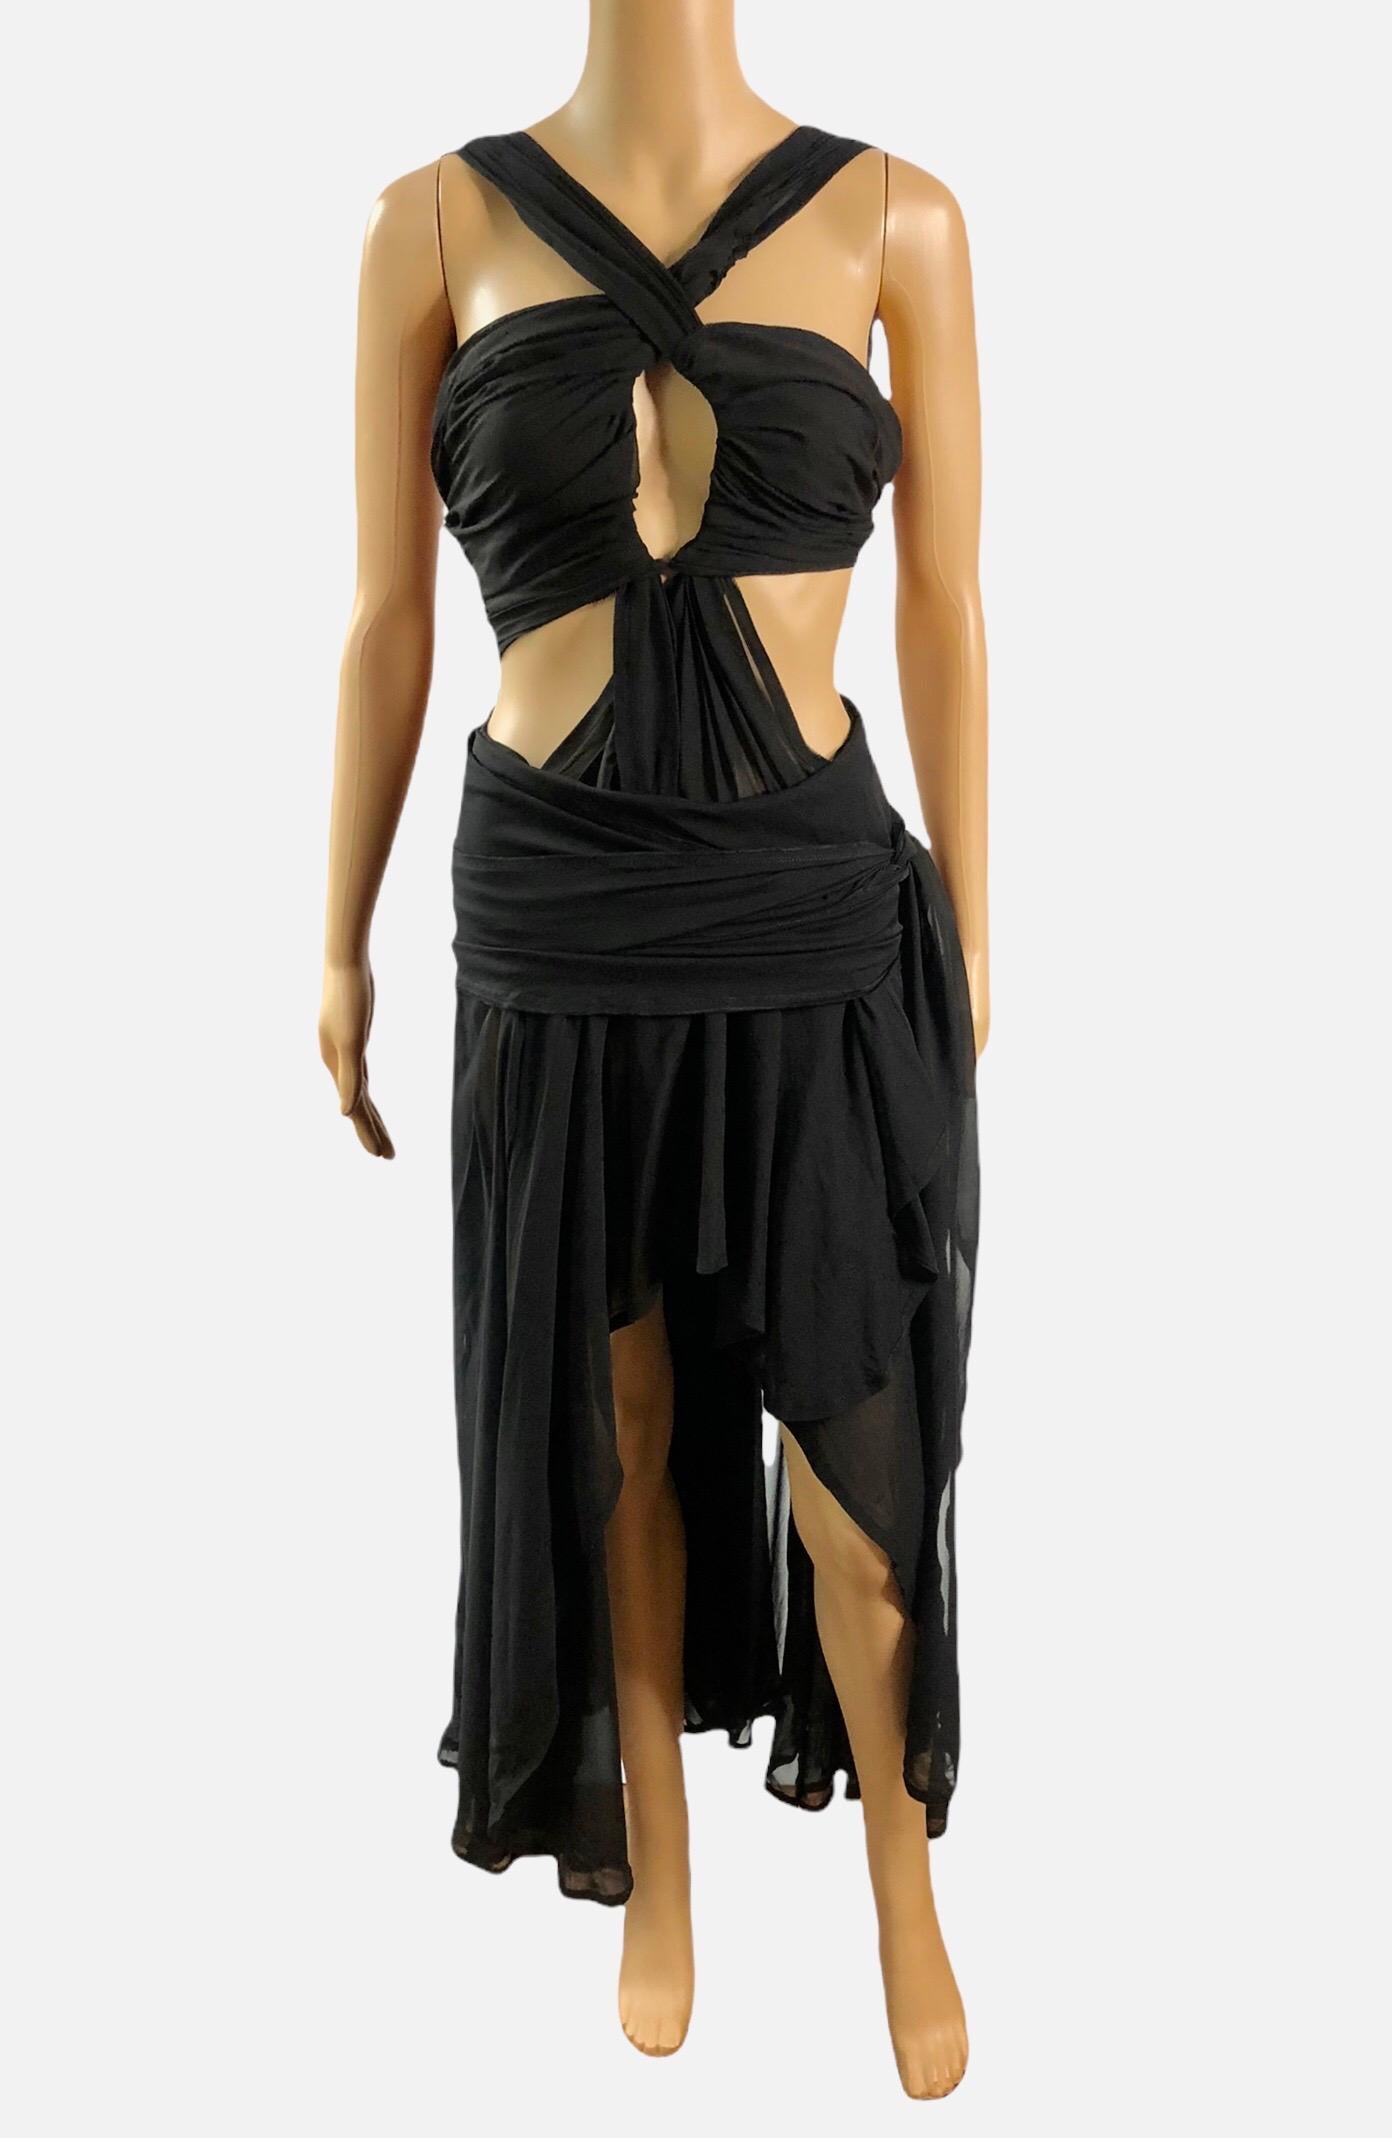 Tom Ford for Yves Saint Laurent S/S 2002 Runway Sheer Cutout Black Dress Gown For Sale 2